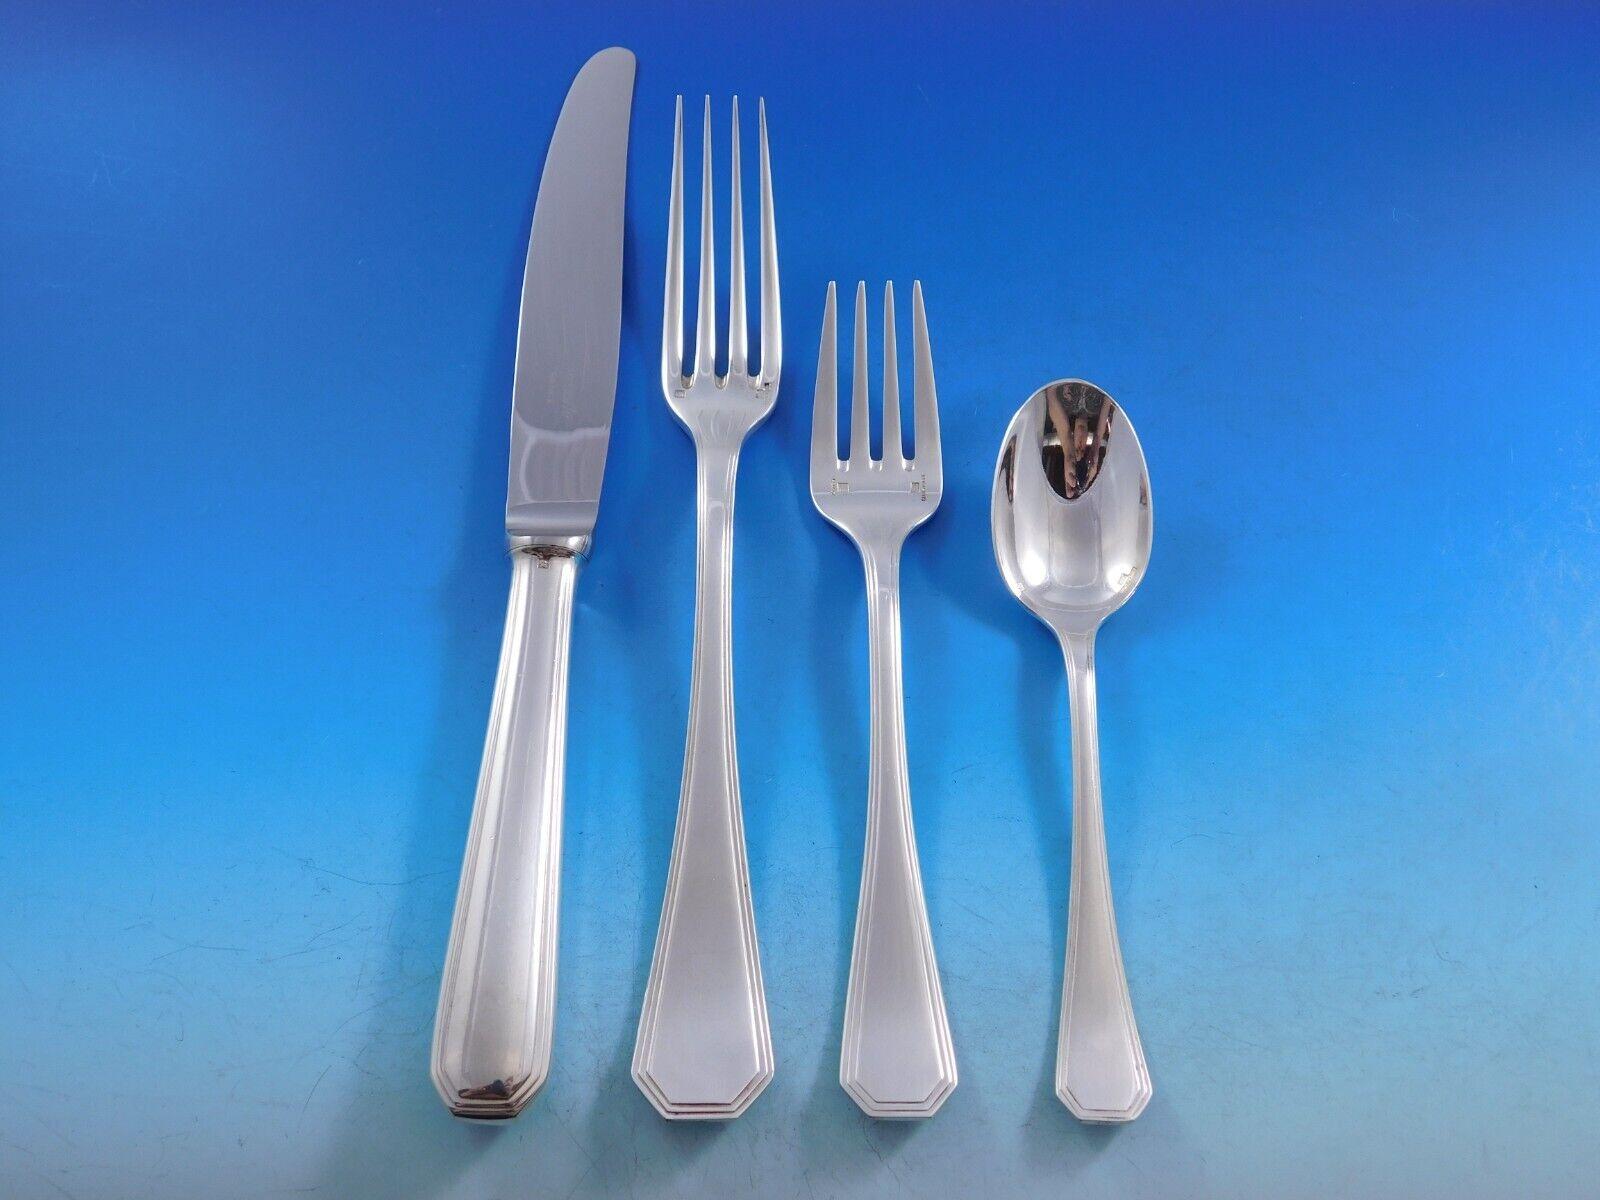 With a dedication to perfection and quality, Christofle flatware creations unite craftsmanship and modern technique, resulting in flatware to be handed down through generations. 

Following World War I, America became synonymous with modernity and